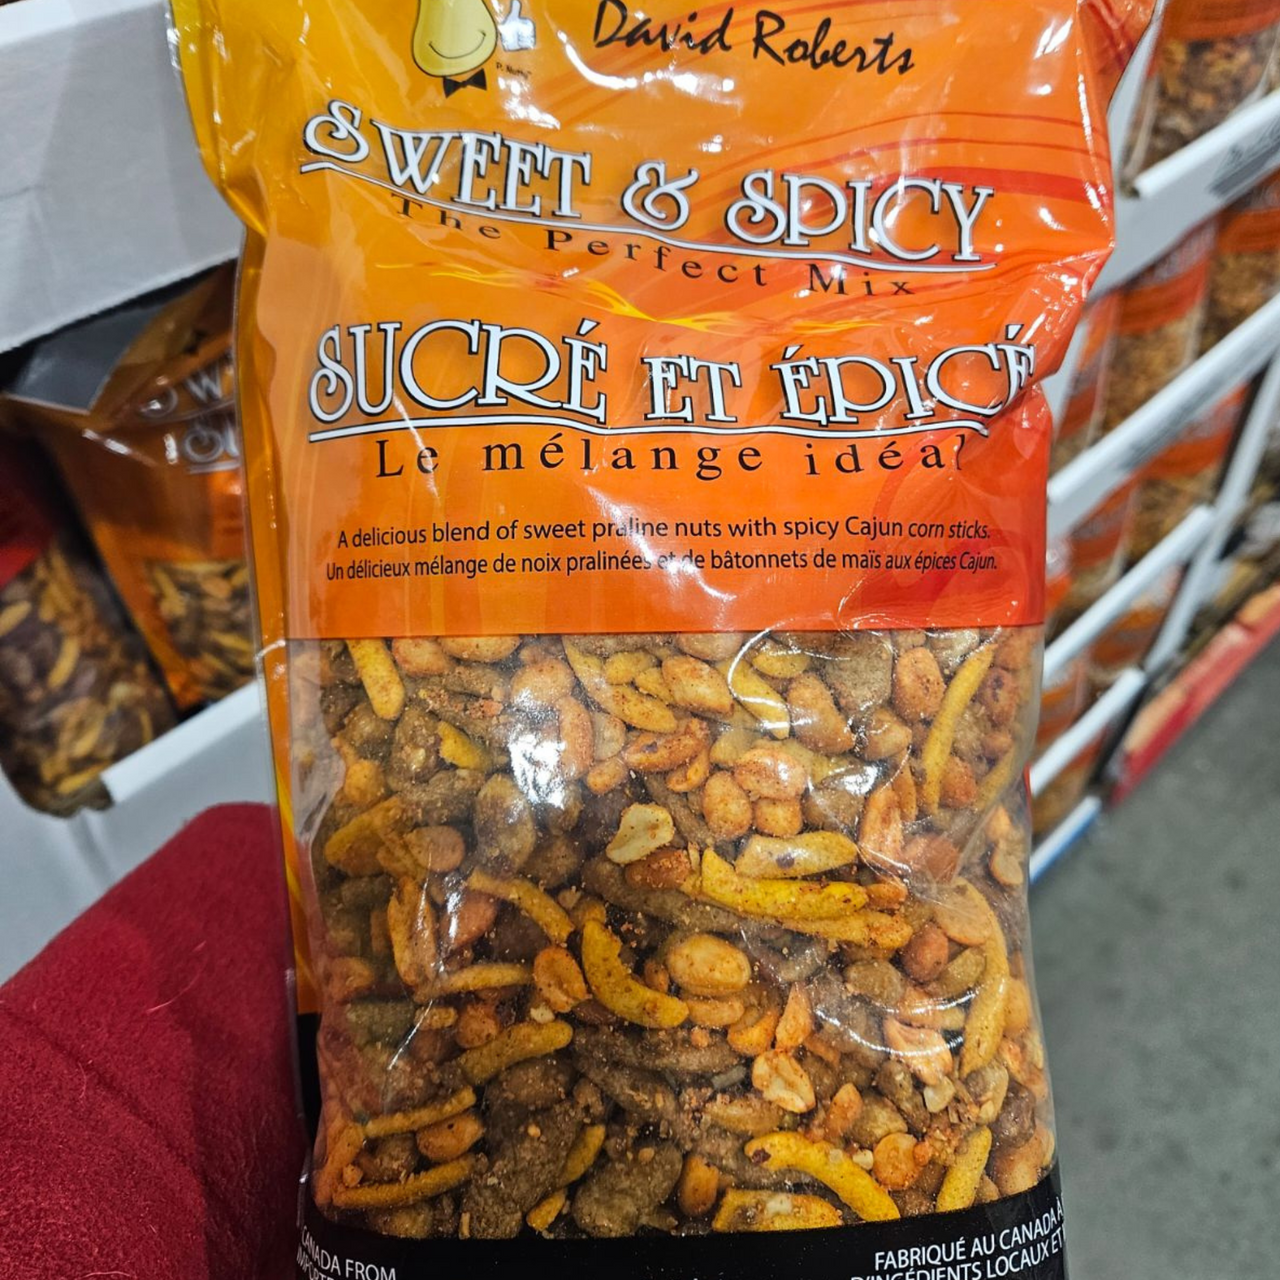 Image of David Roberts Sweet and Spicy Nut Mix - 1 x 1.4 Kilos